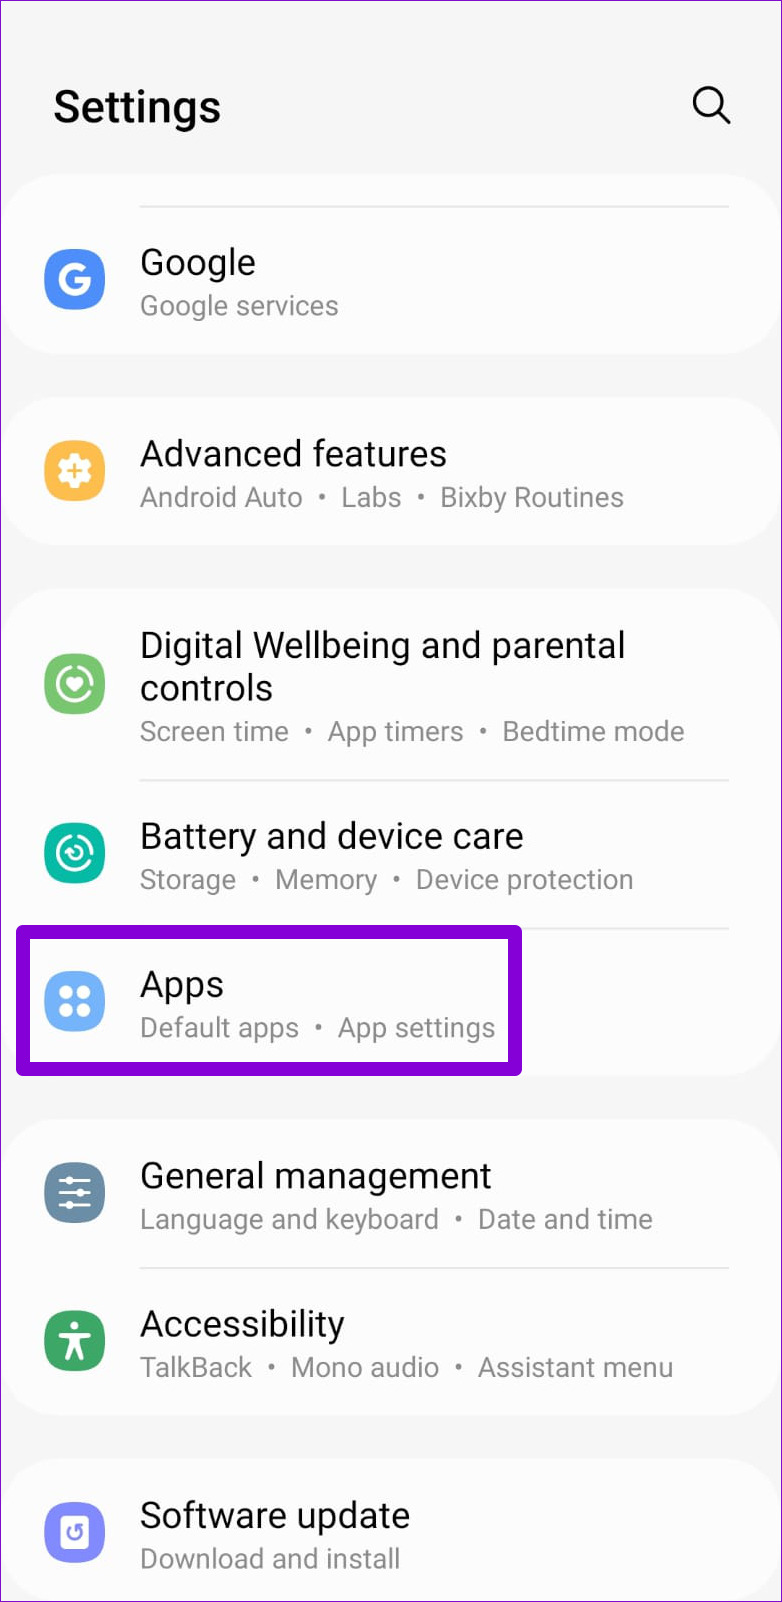 Open Settings on your device.
Scroll down and tap on Apps or Application Manager.